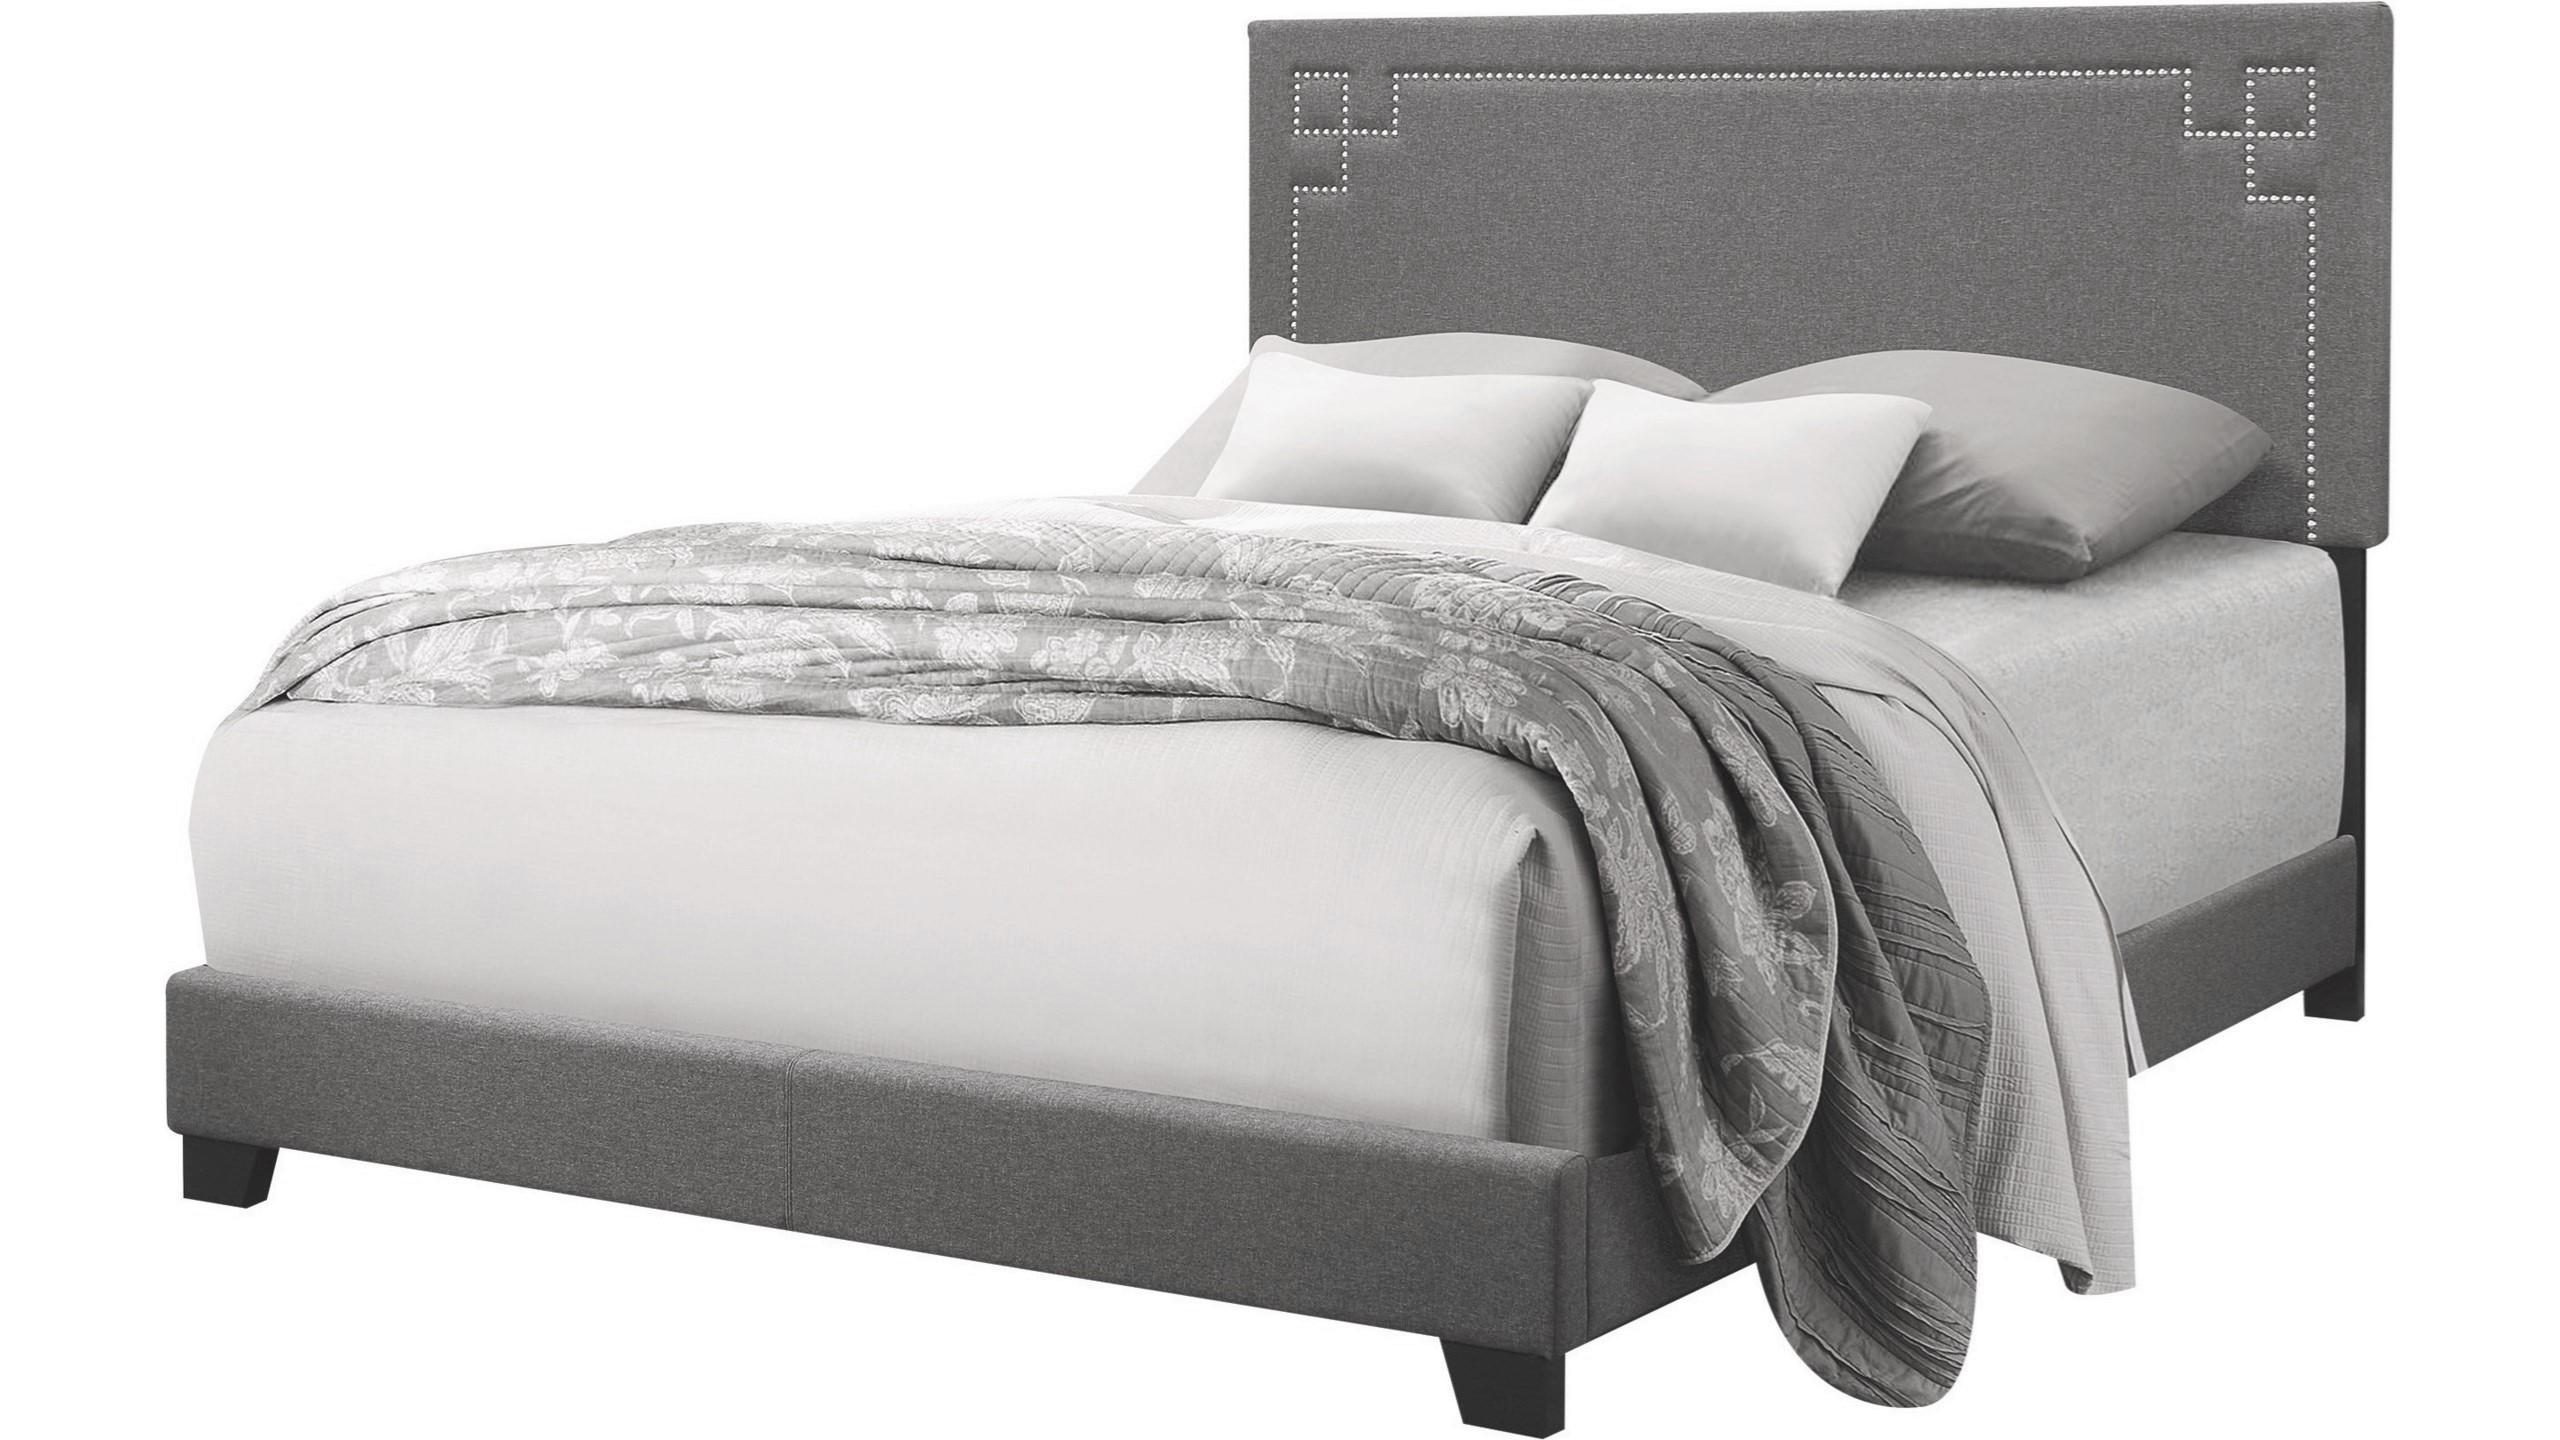 

    
Transitional Gray Fabric Queen Bed by Acme Ishiko II 20910Q
